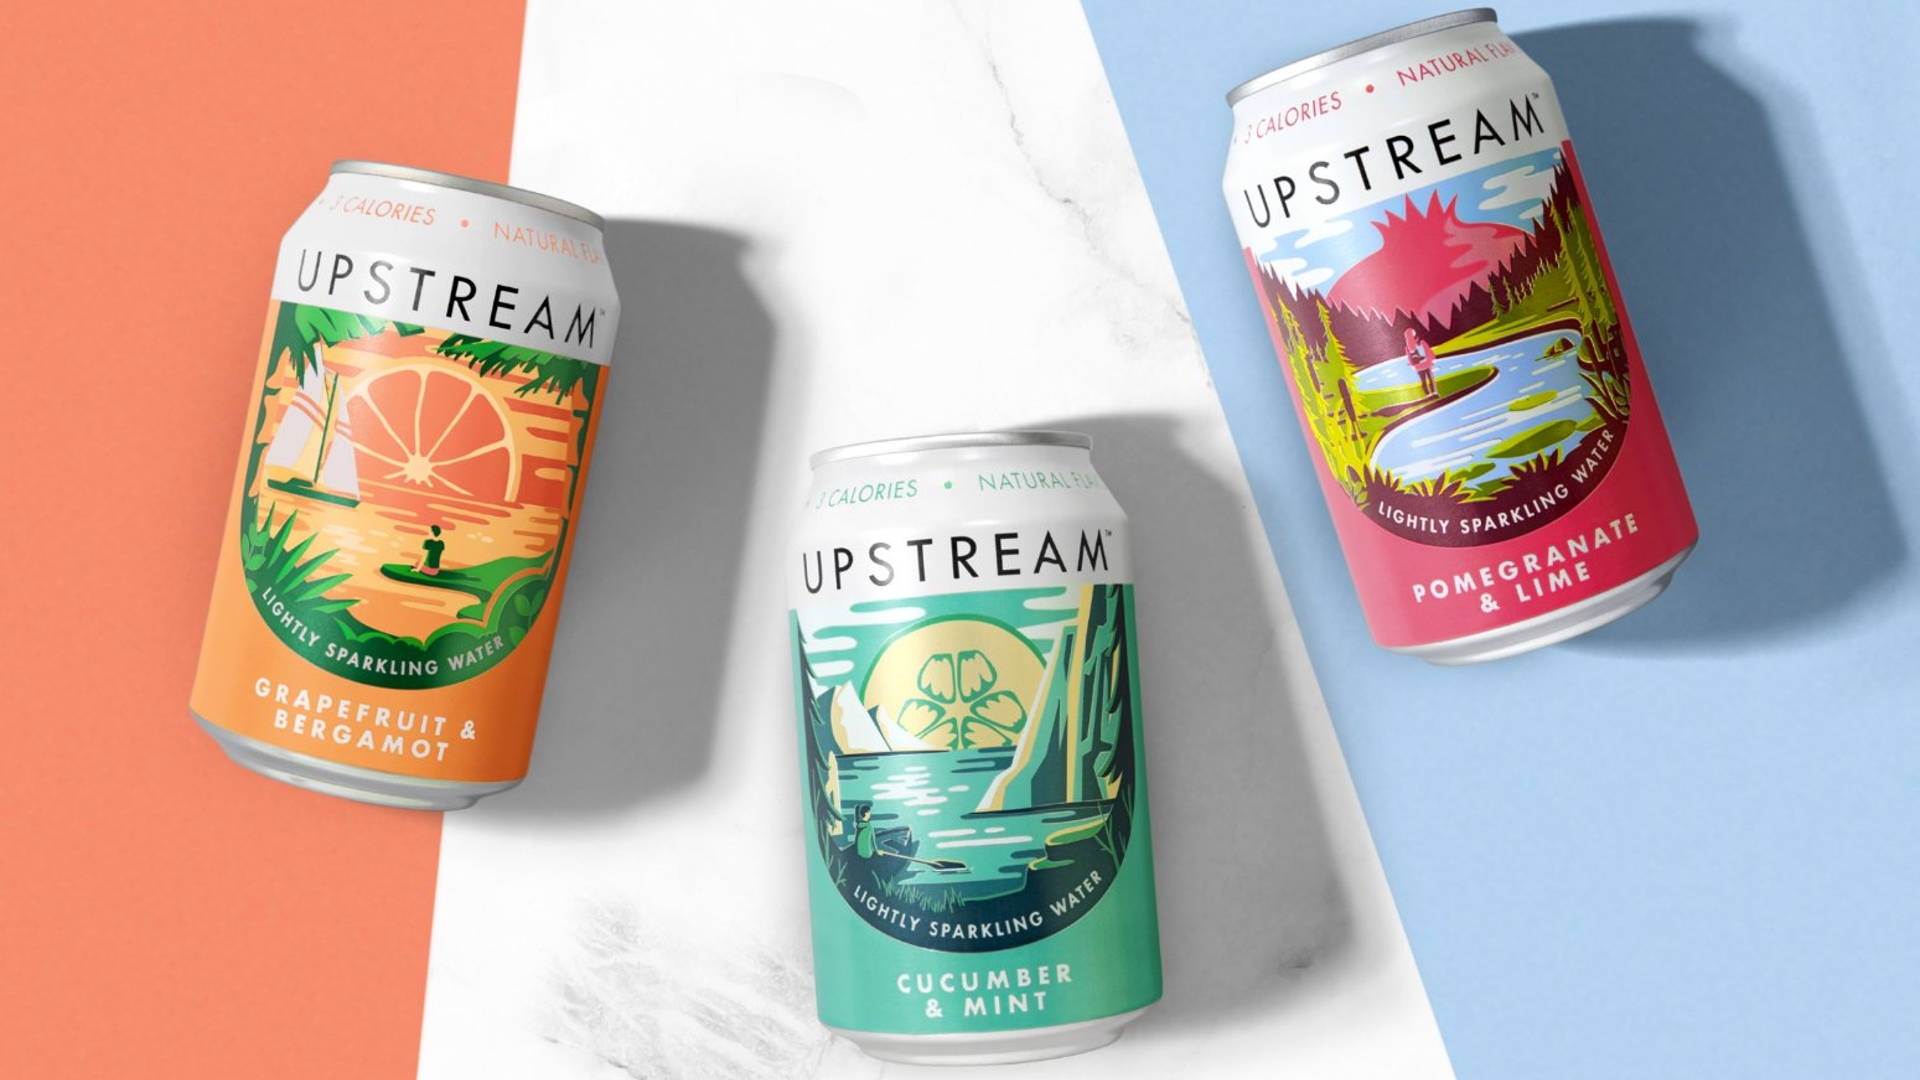 Featured image for Robot Food Brings A Sparkle To The Everyday With New Brand Upstream